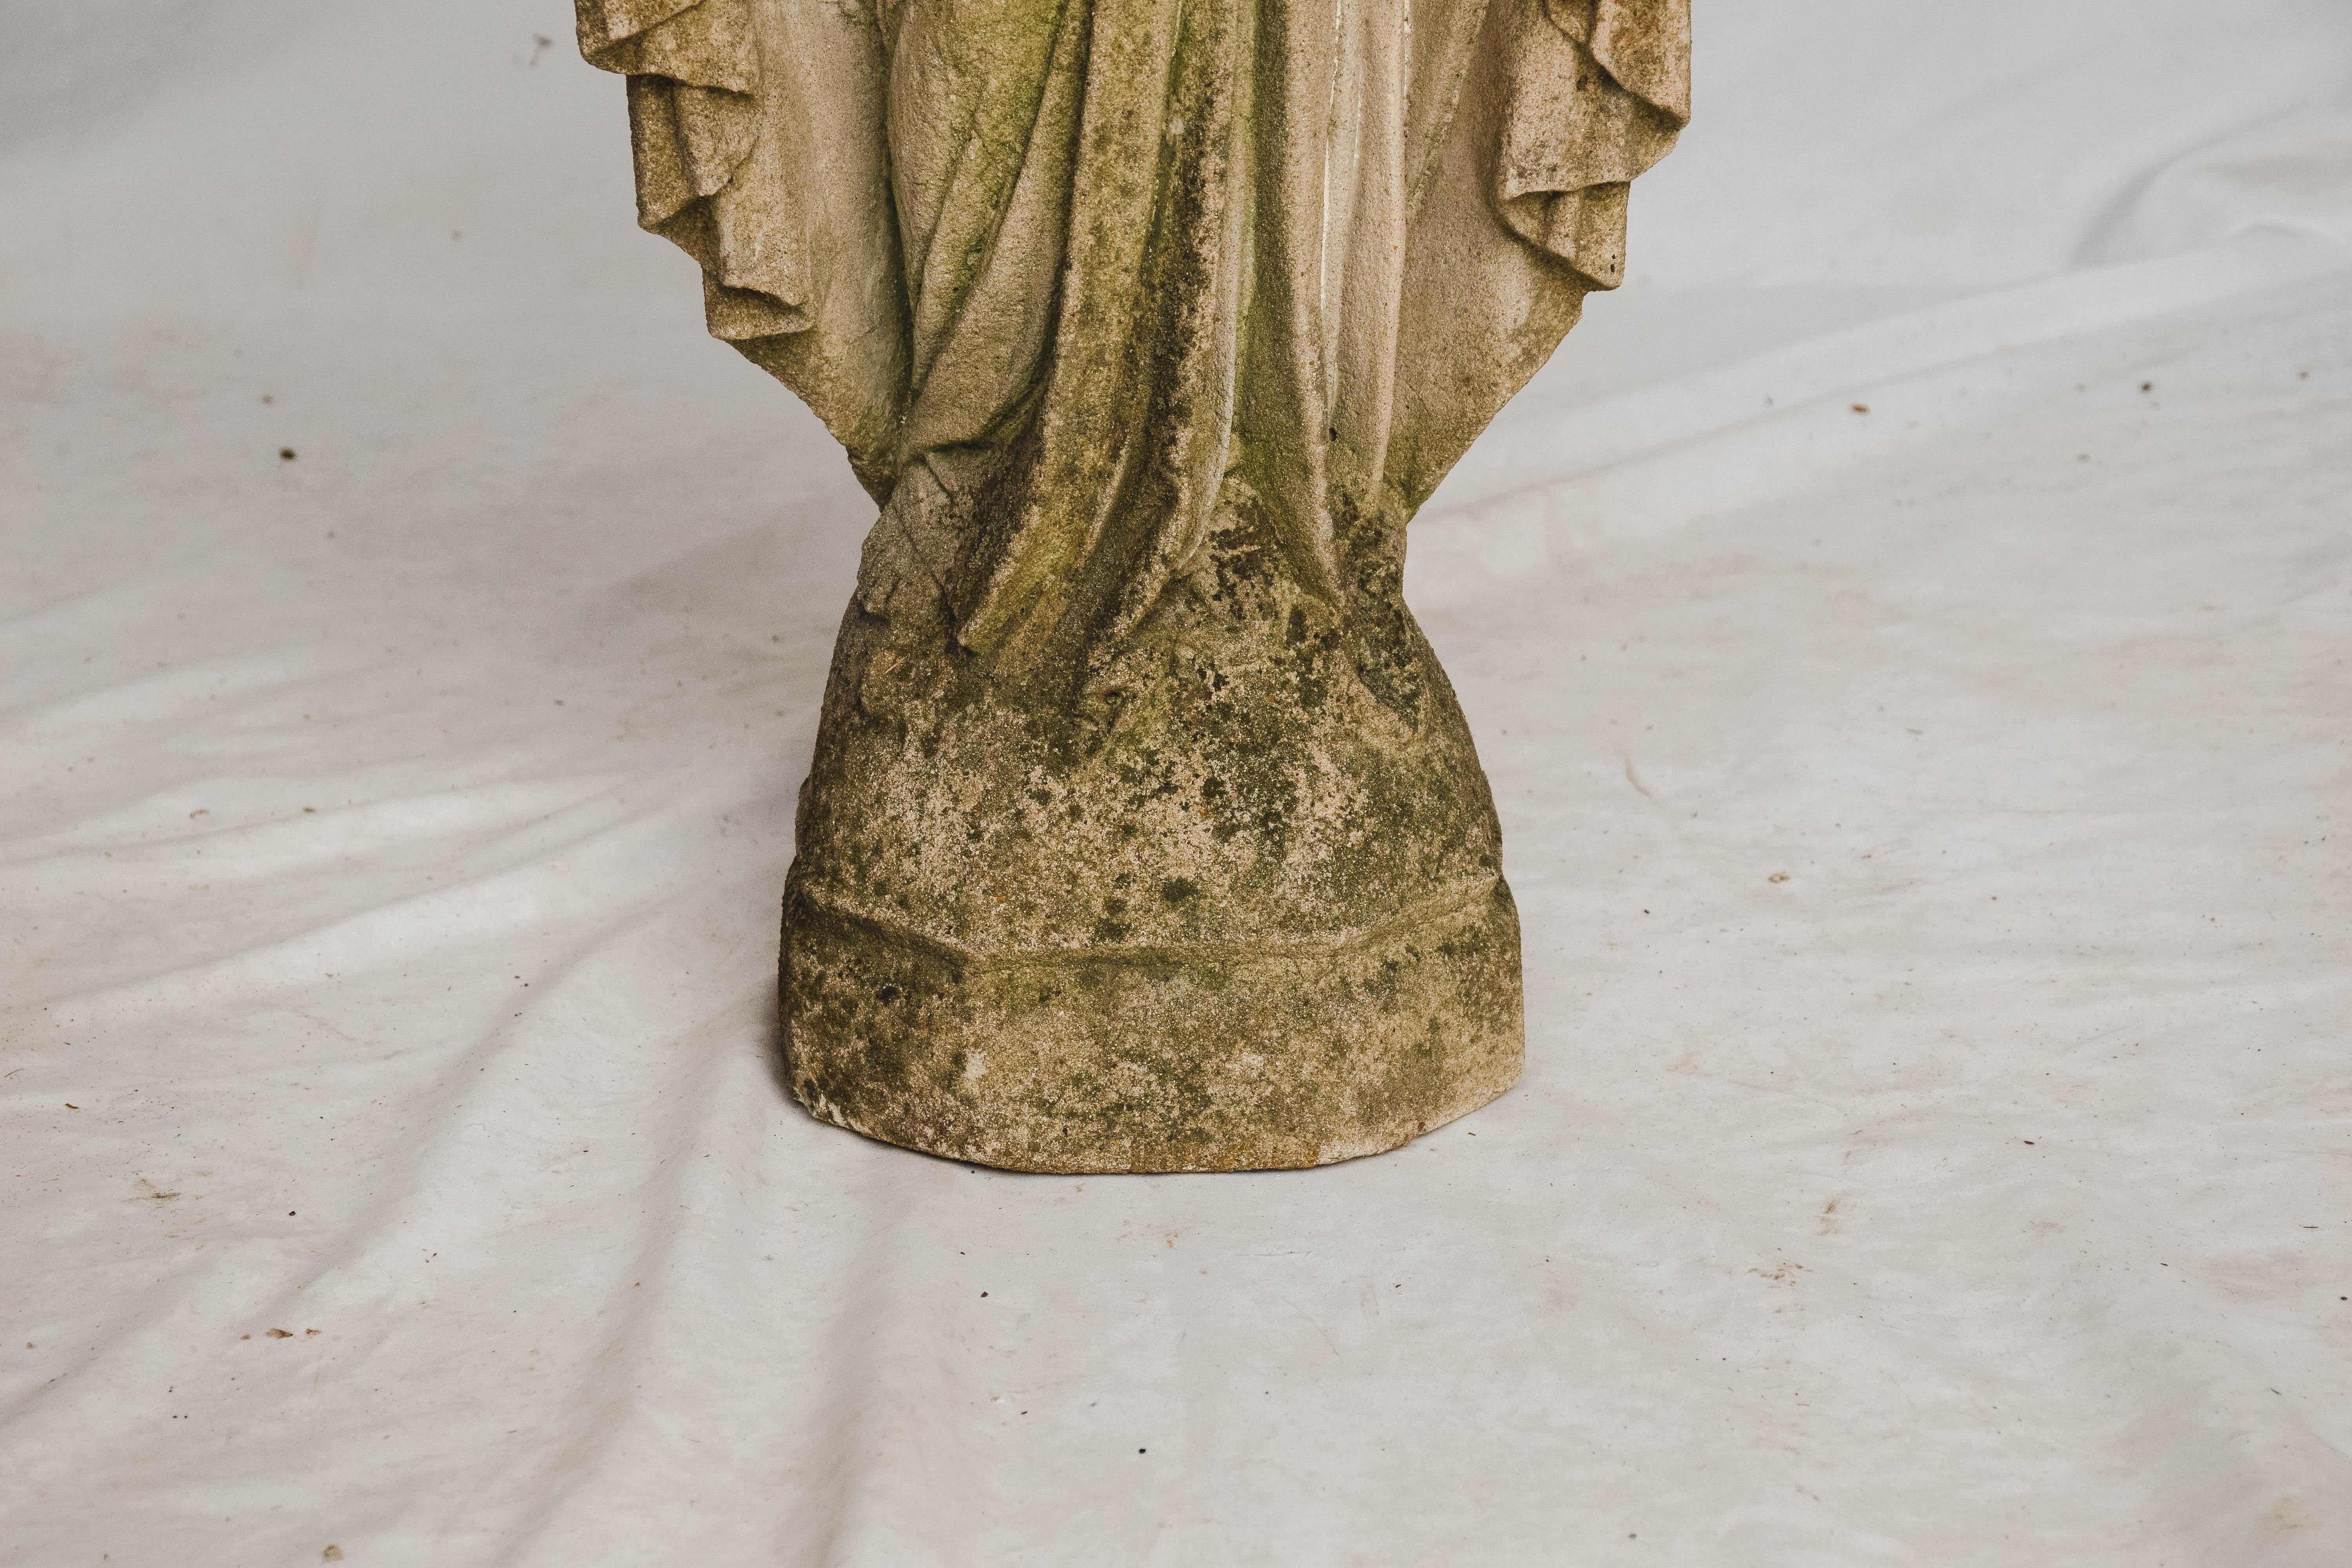 This is a concrete statue of The Virgin Mary. We believe this statue was once used outside of a church. The statue has a wonderful aged patina. This beautiful statue could be used in your home or garden.